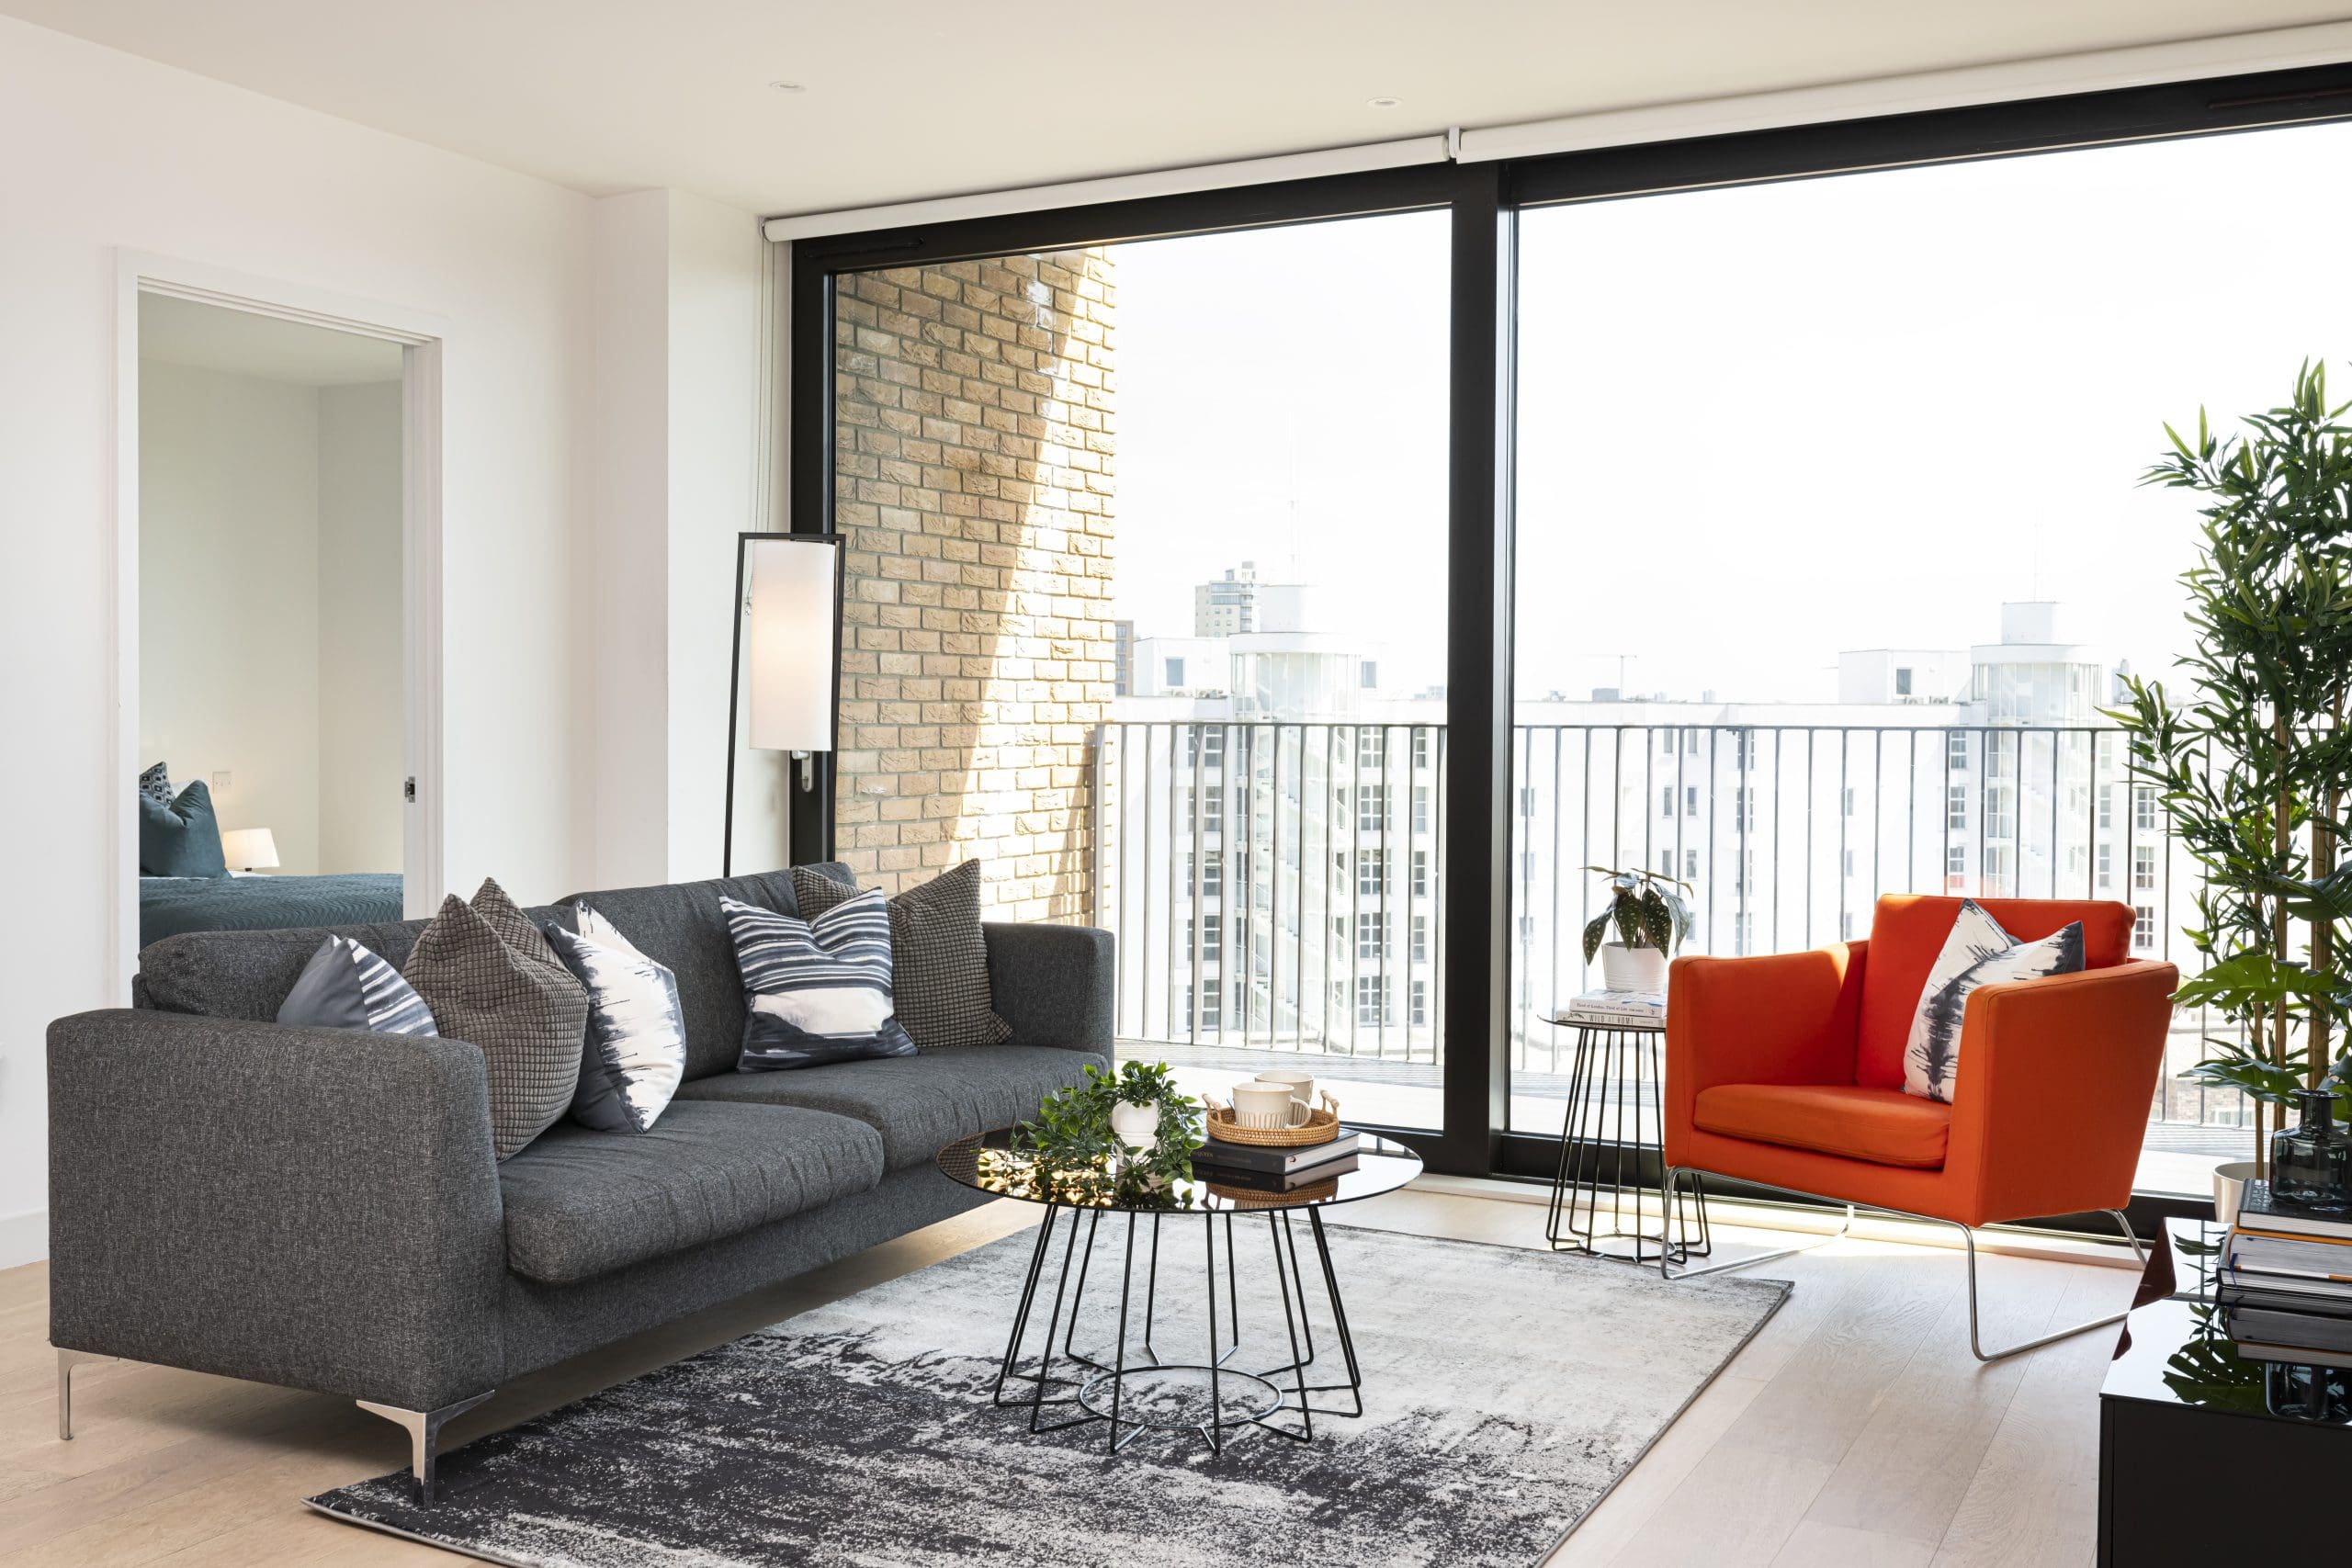 Living space with an outdoor balcony overlooking the city at the Royal Wharf development.